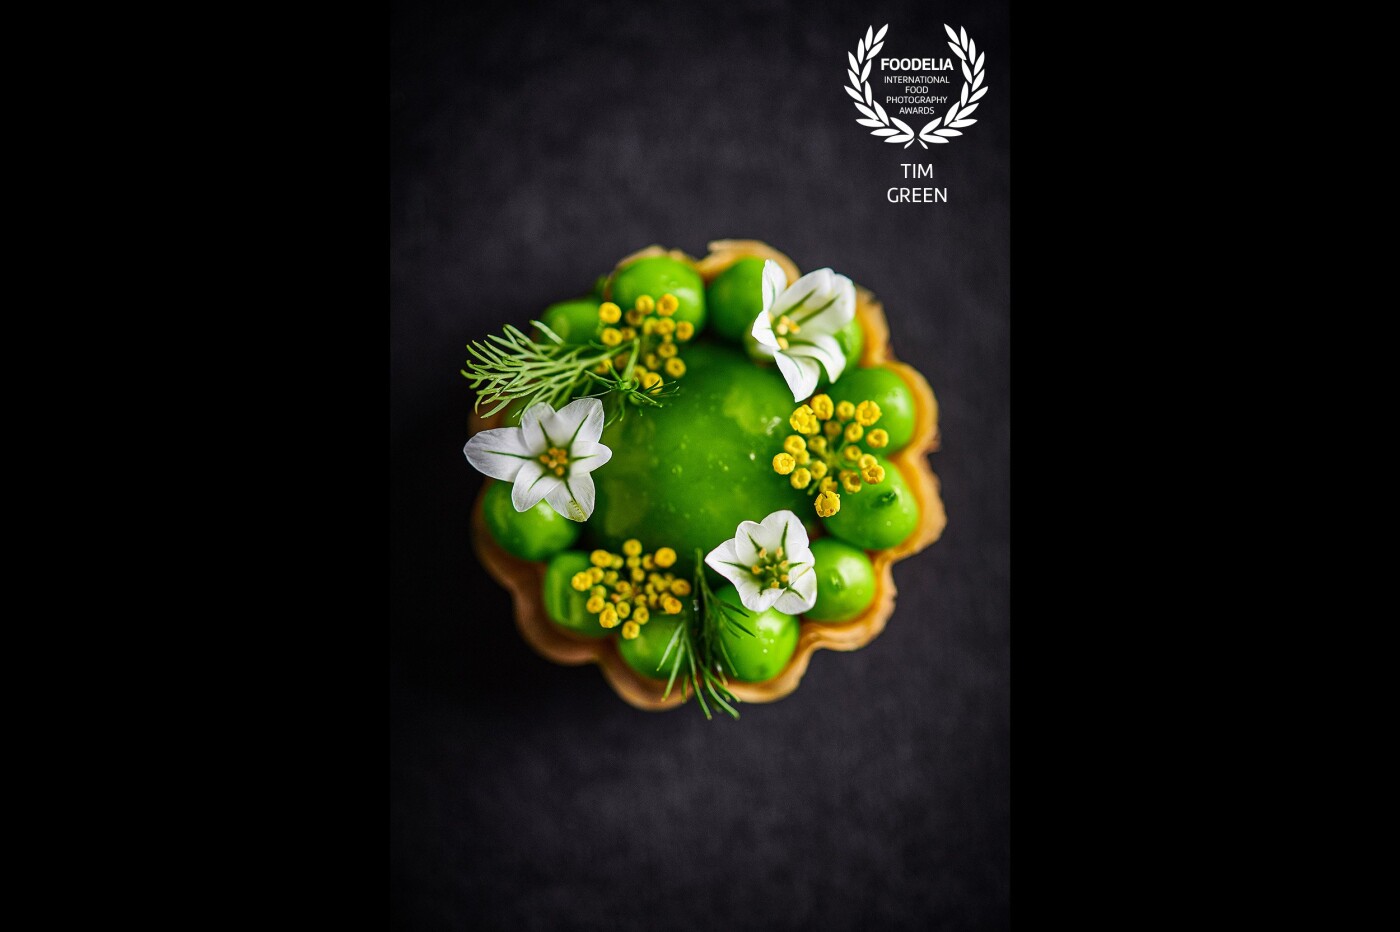 Pea Panna Cotta dipped in Pea Juice, Compressed Peas in Wild Garlic Oil and garnished with Leek and Fennel Flowers. One of the amazing snacks presented by Adam Handling of The Frog Covent Garden London.